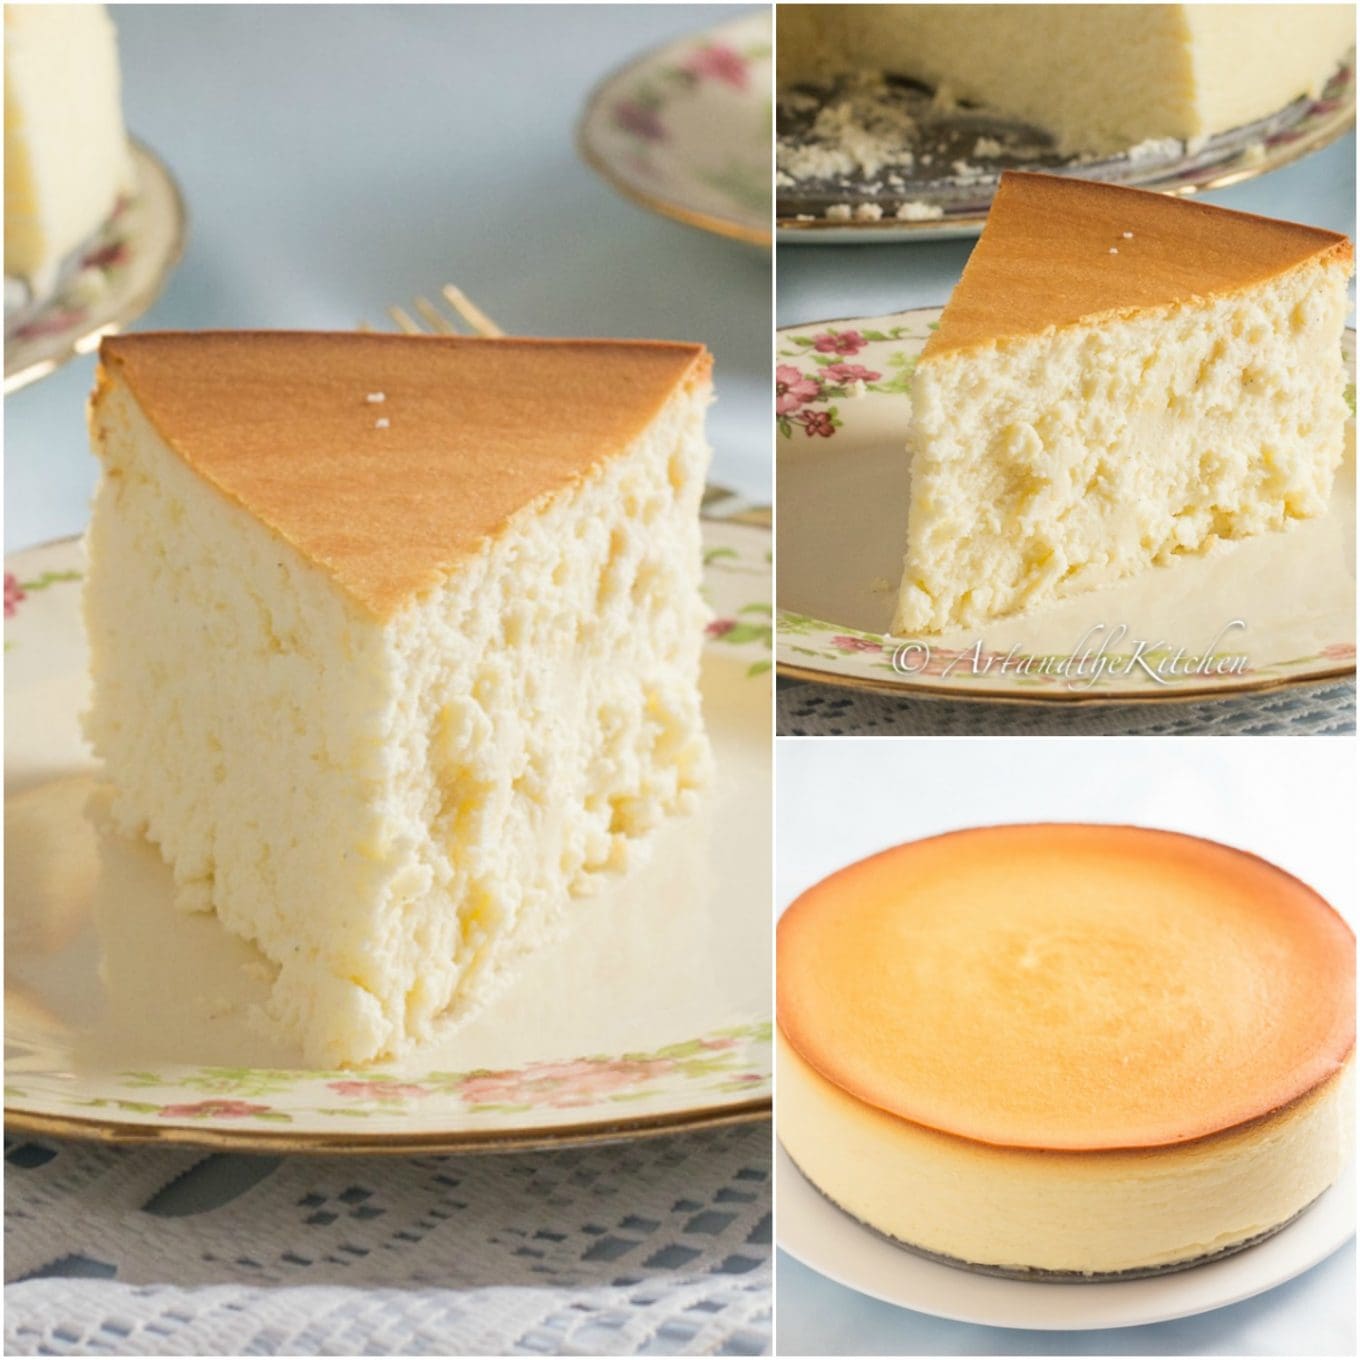 Collage of photos of a new york cheesecake